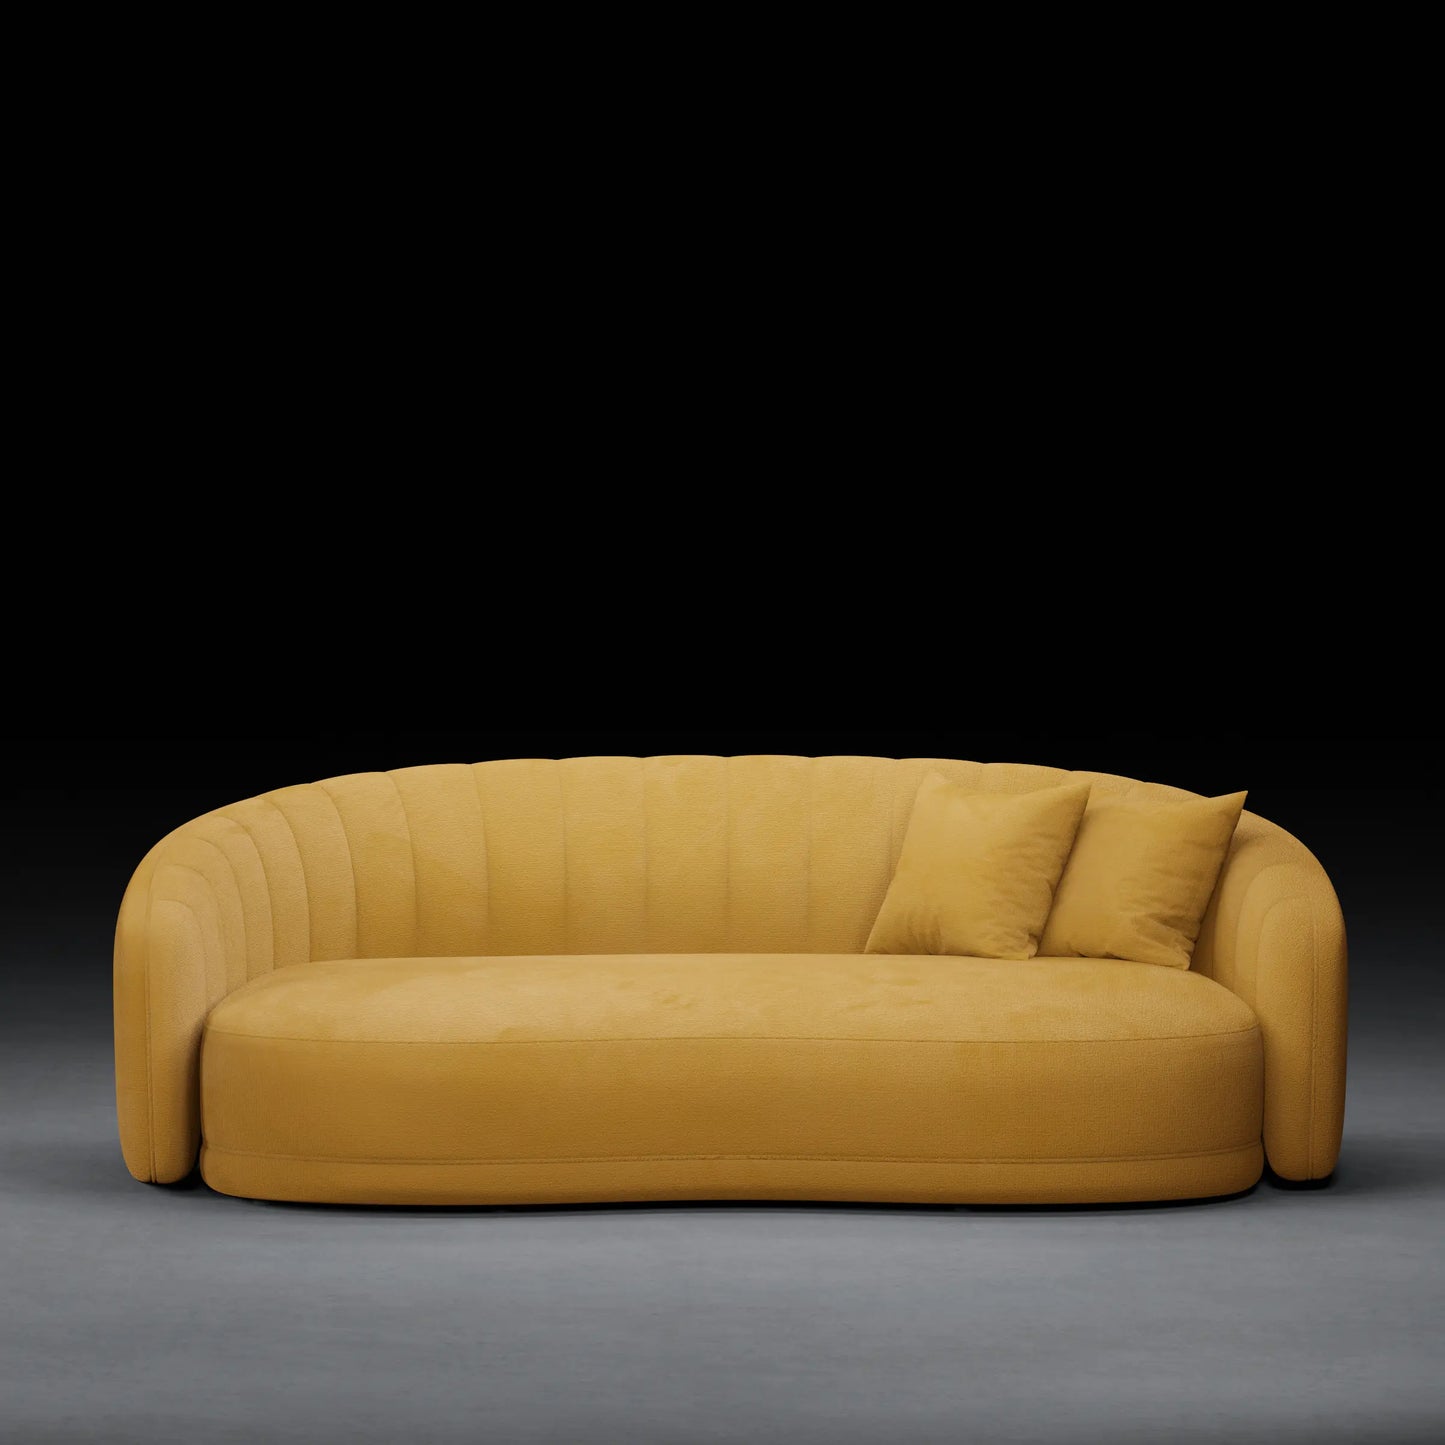 LILY - 3 Seater Couch in Linen Finish | Yellow Color